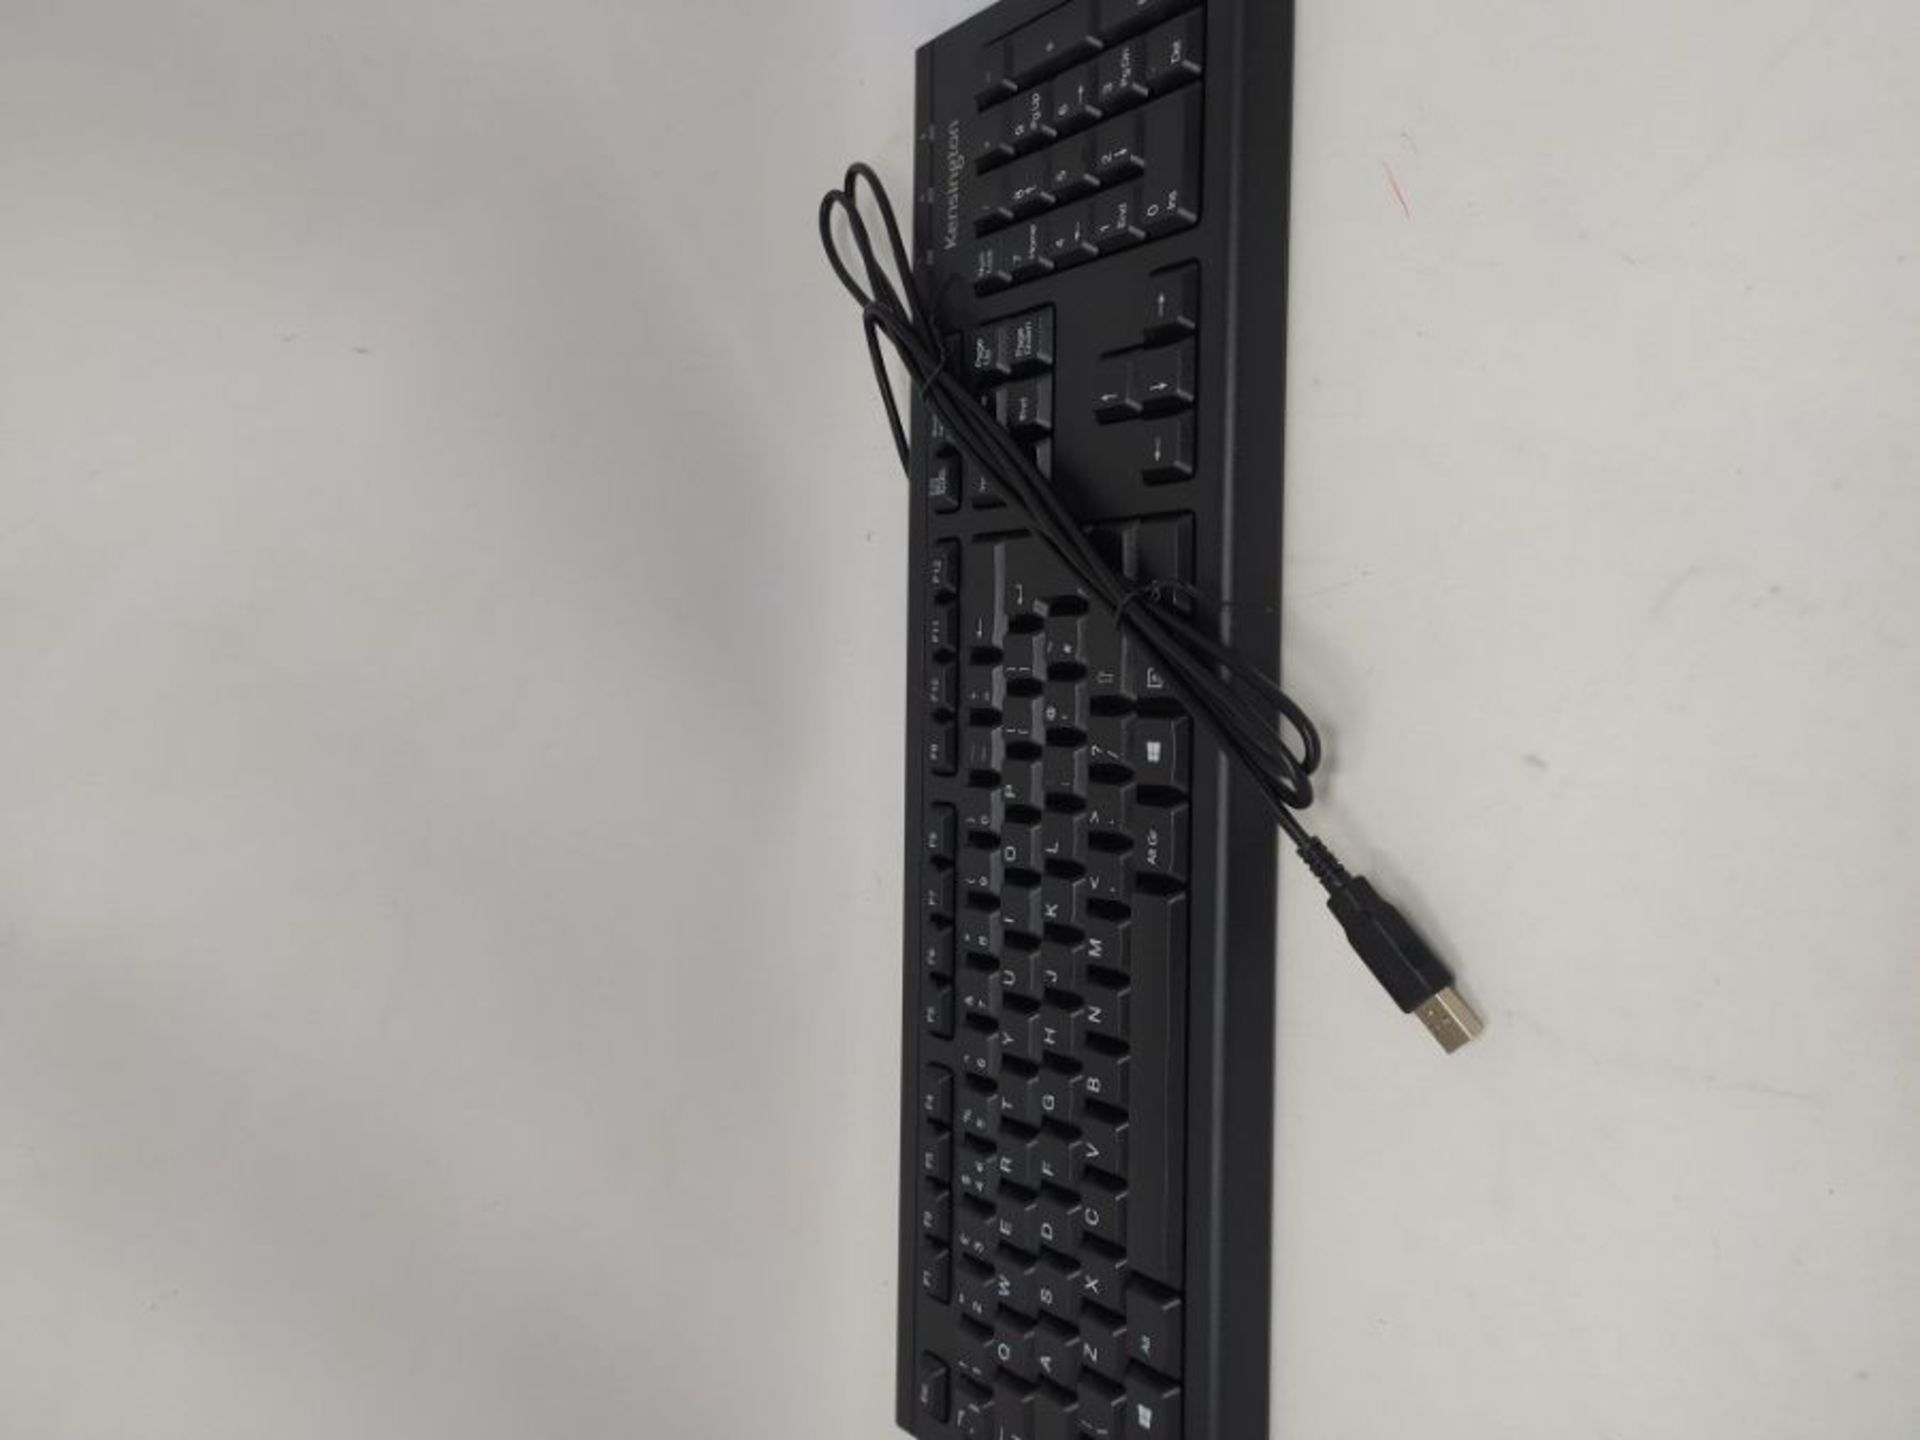 Kensington ValuKeyboard - wired keyboard for PC, Laptop, Desktop PC, Computer, noteboo - Image 2 of 2